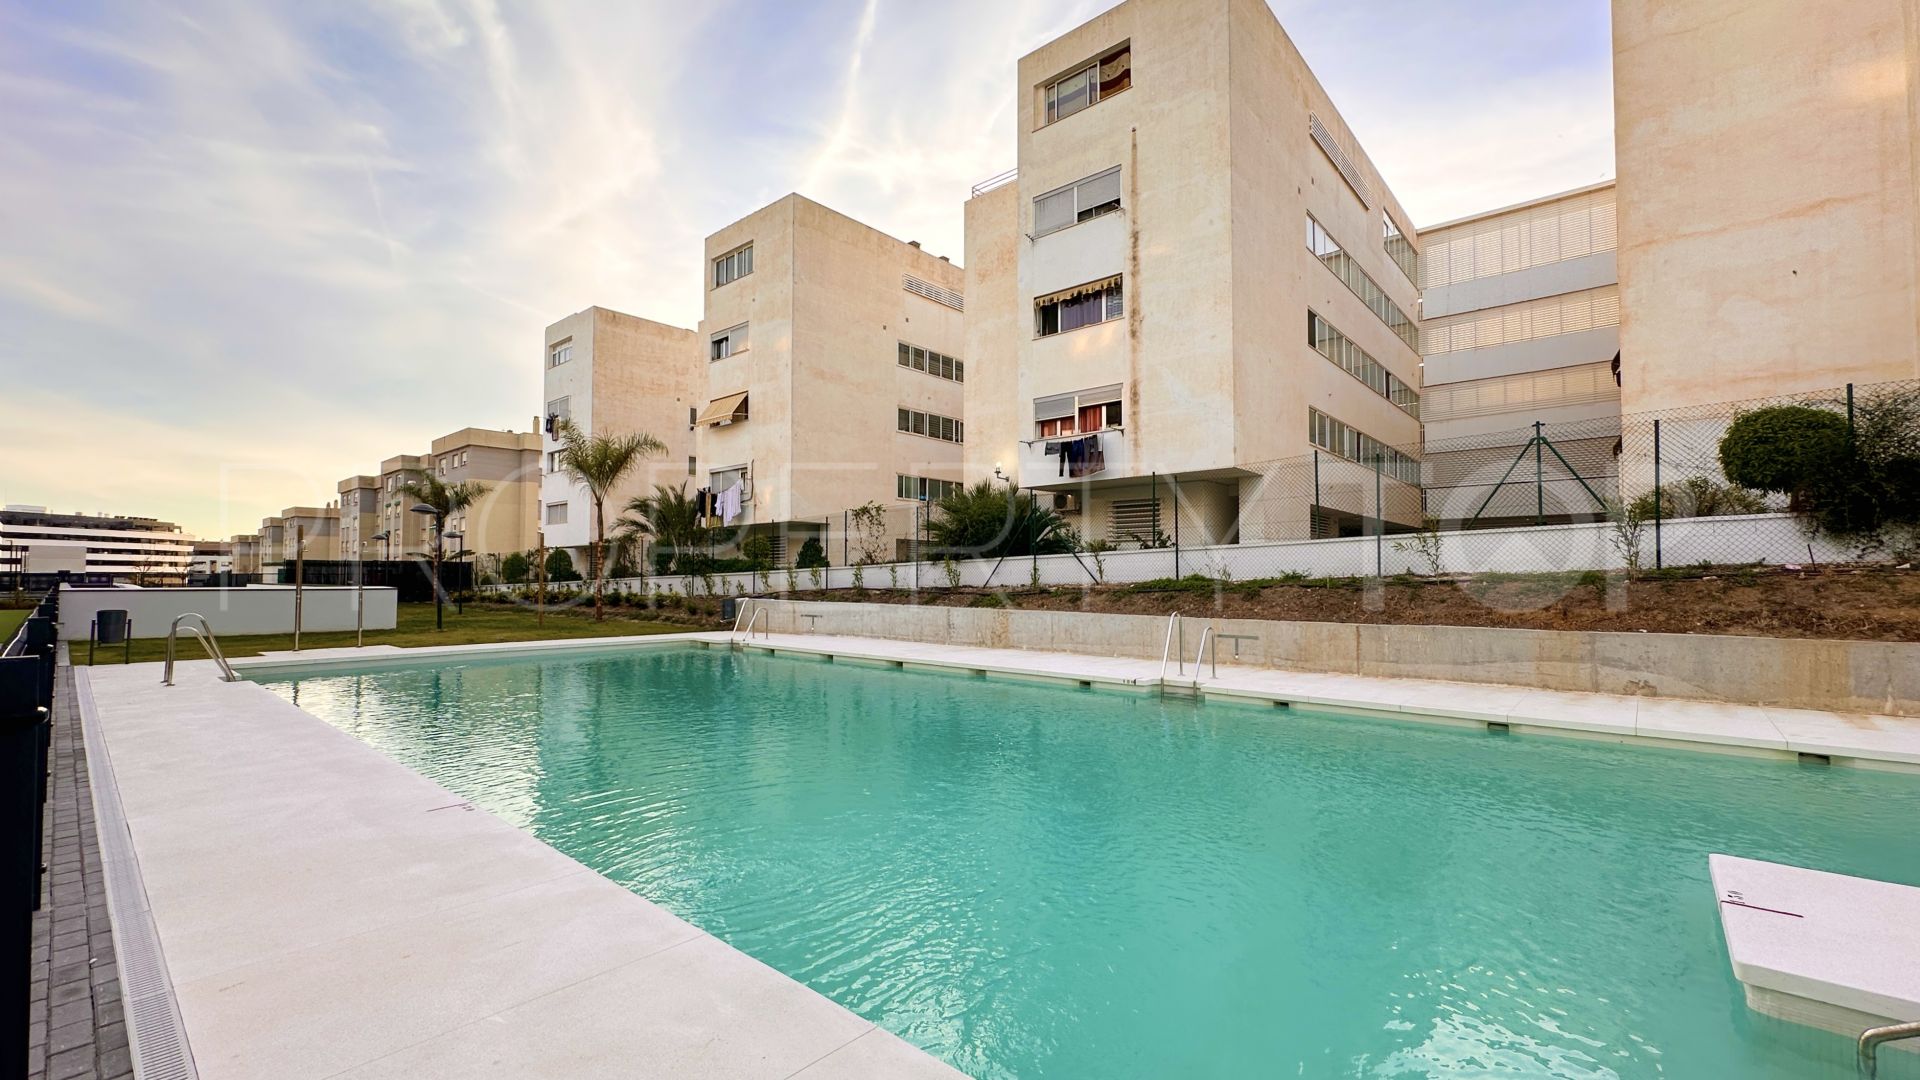 2 bedrooms apartment in El Atabal for sale